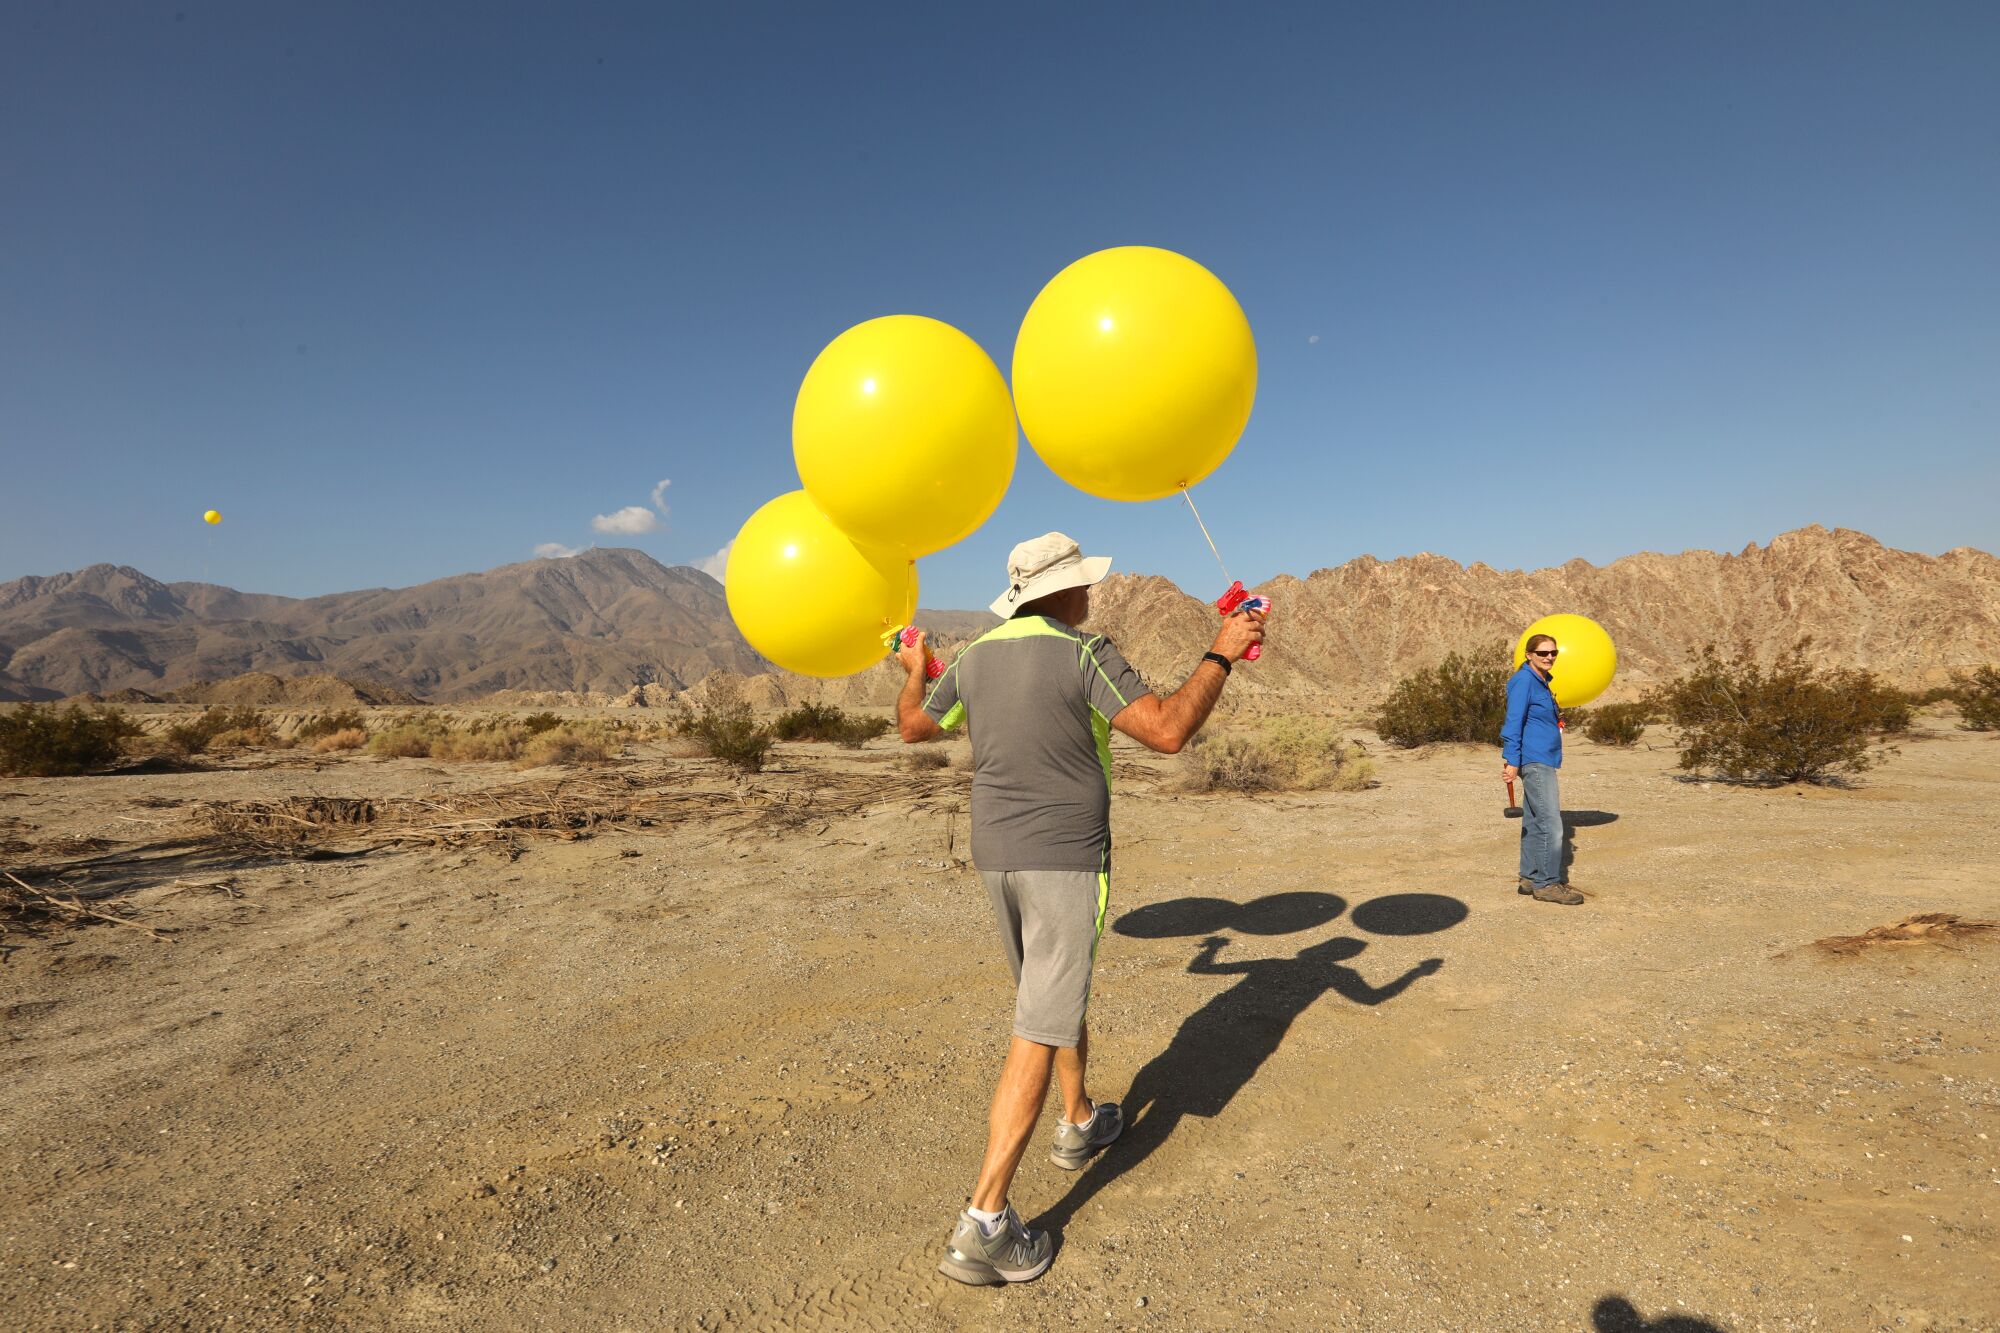 People place yellow balloons in the desert.